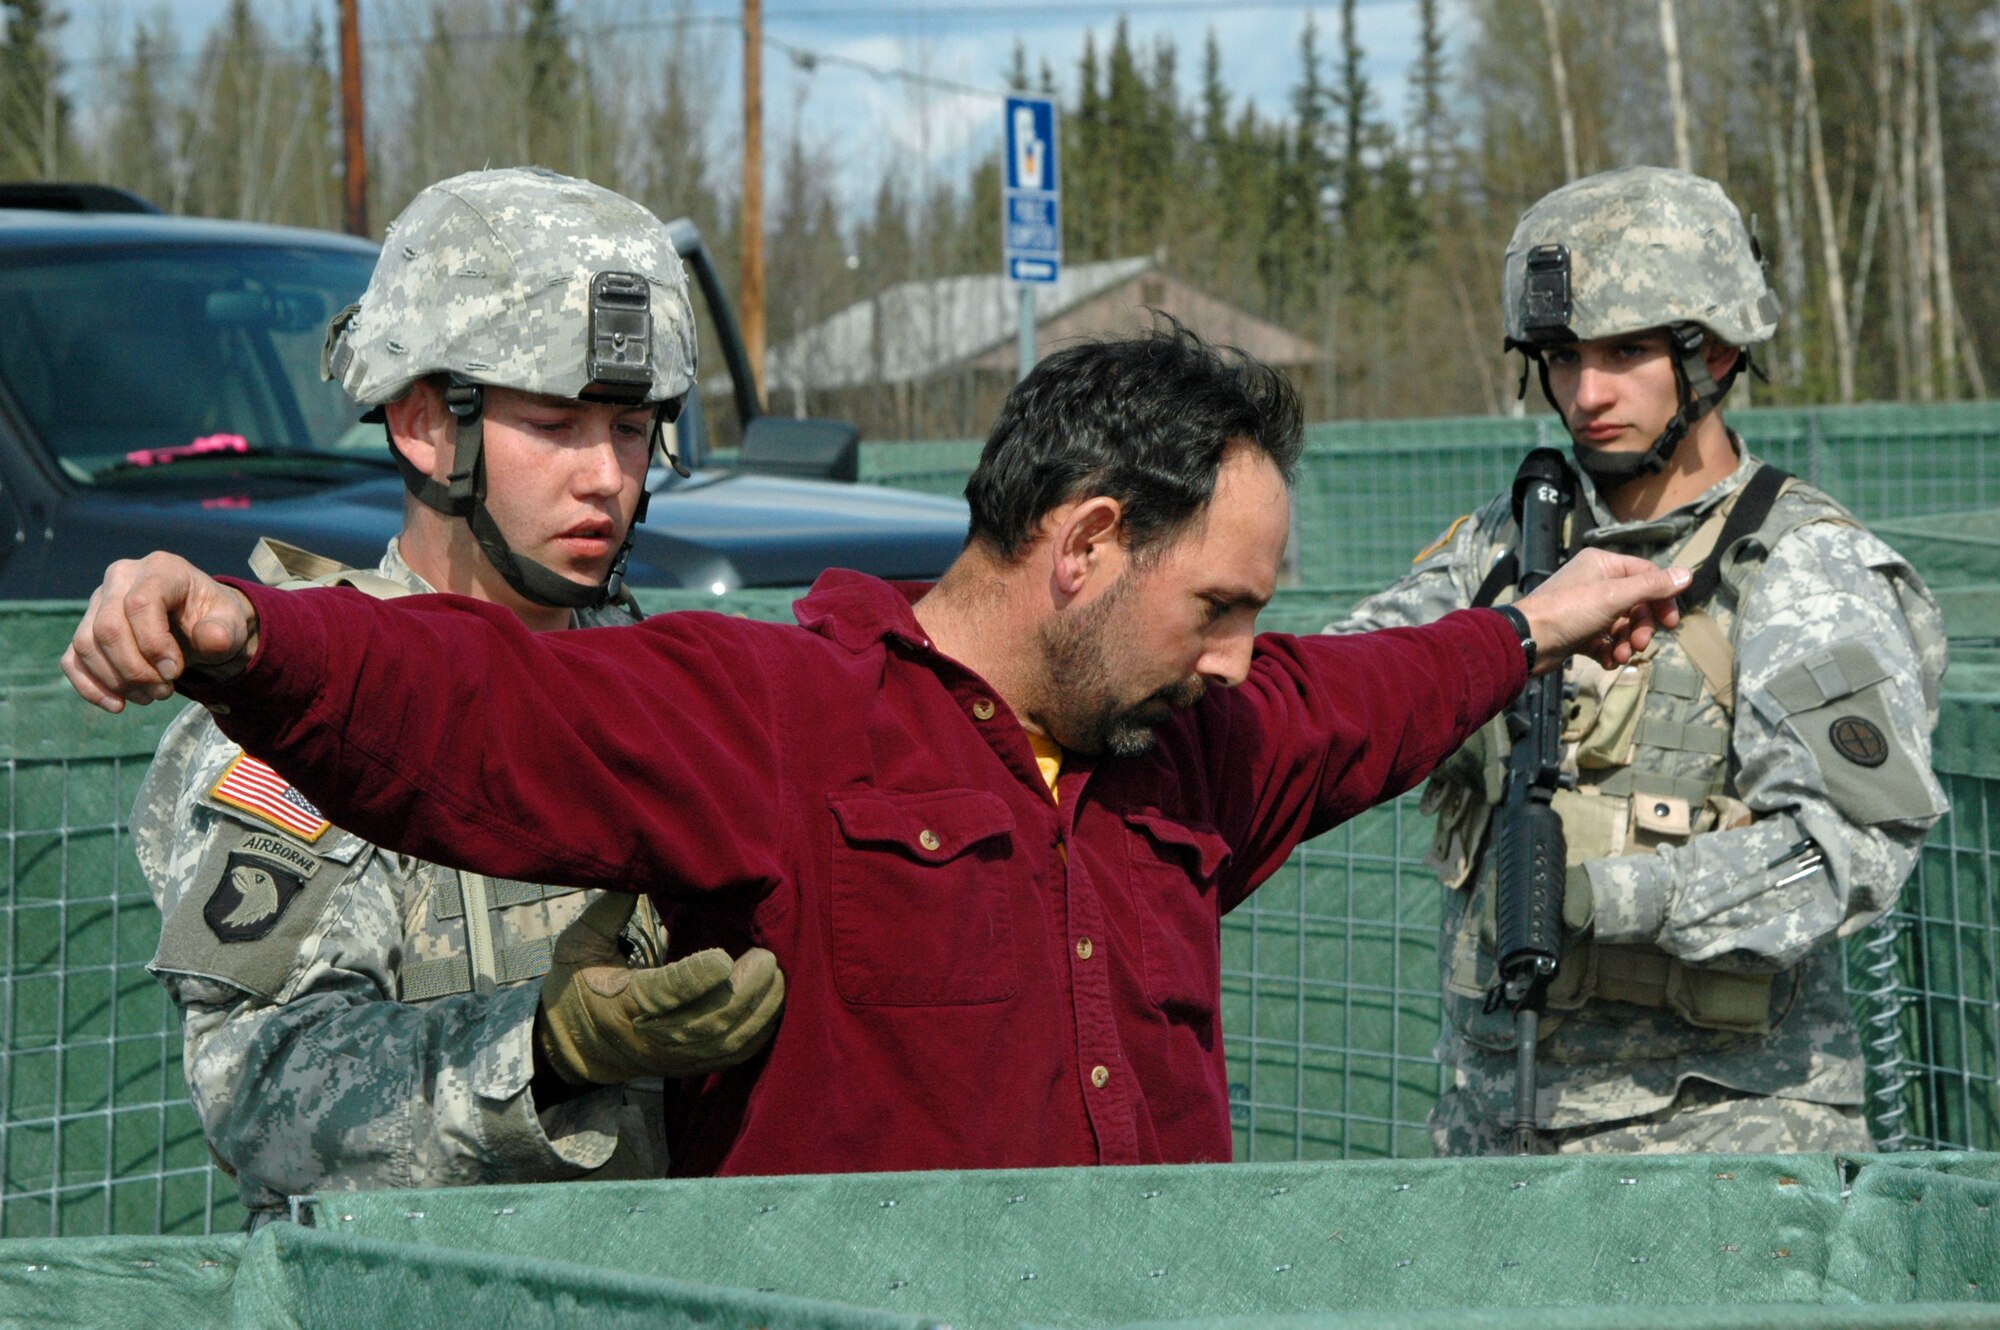 North Pole, Alaska – Sergeant Adam Dack with  the Nebraska National Guard searches a suspected terrorist that was removed from his vehicle during Entry Control Point (ECP) stop while his teammate provides security as part of an exercise conducted during Alaska Shield / Northern Edge 07.  Exercise Alaska Shield / Northern Edge 07 is a state of Alaska / US Northern Command sponsored homeland defense and defense support of civil authorities exercise; part of the national-level Ardent Sentry / Northern Edge 07 exercise.  Photo by Chief Mass Communications Specialist Greg Bingaman.